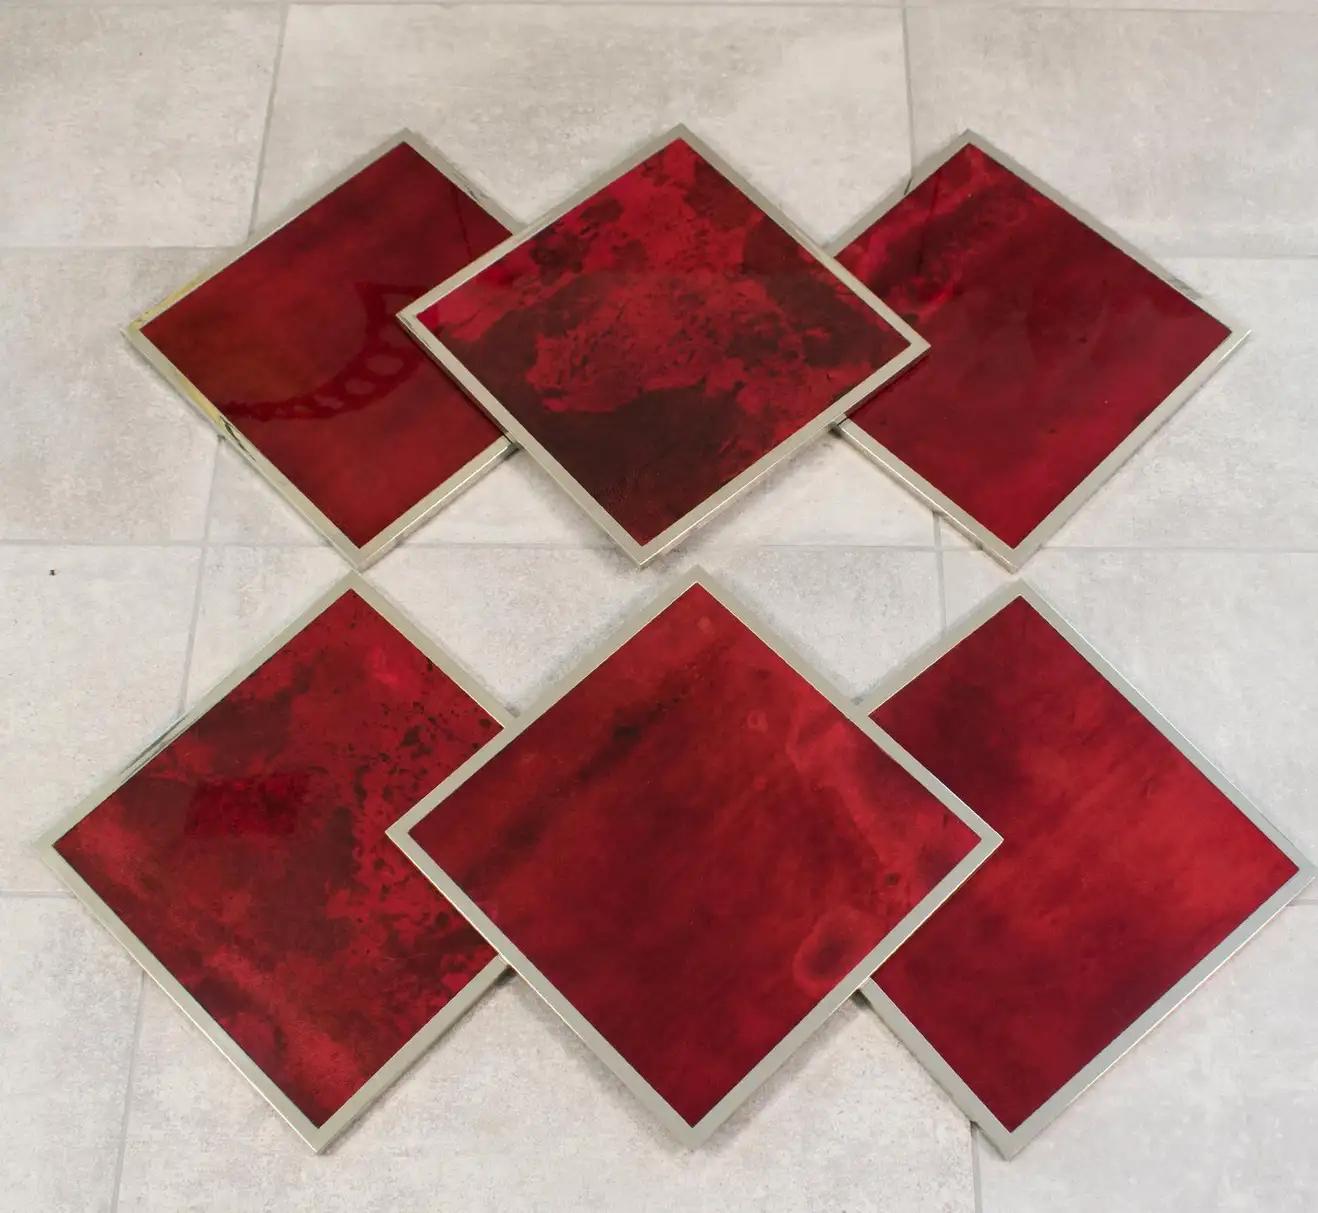 Mid-Century Modern Aldo Tura Goatskin and Chrome Placemat or Charger, 6 Pieces For Sale